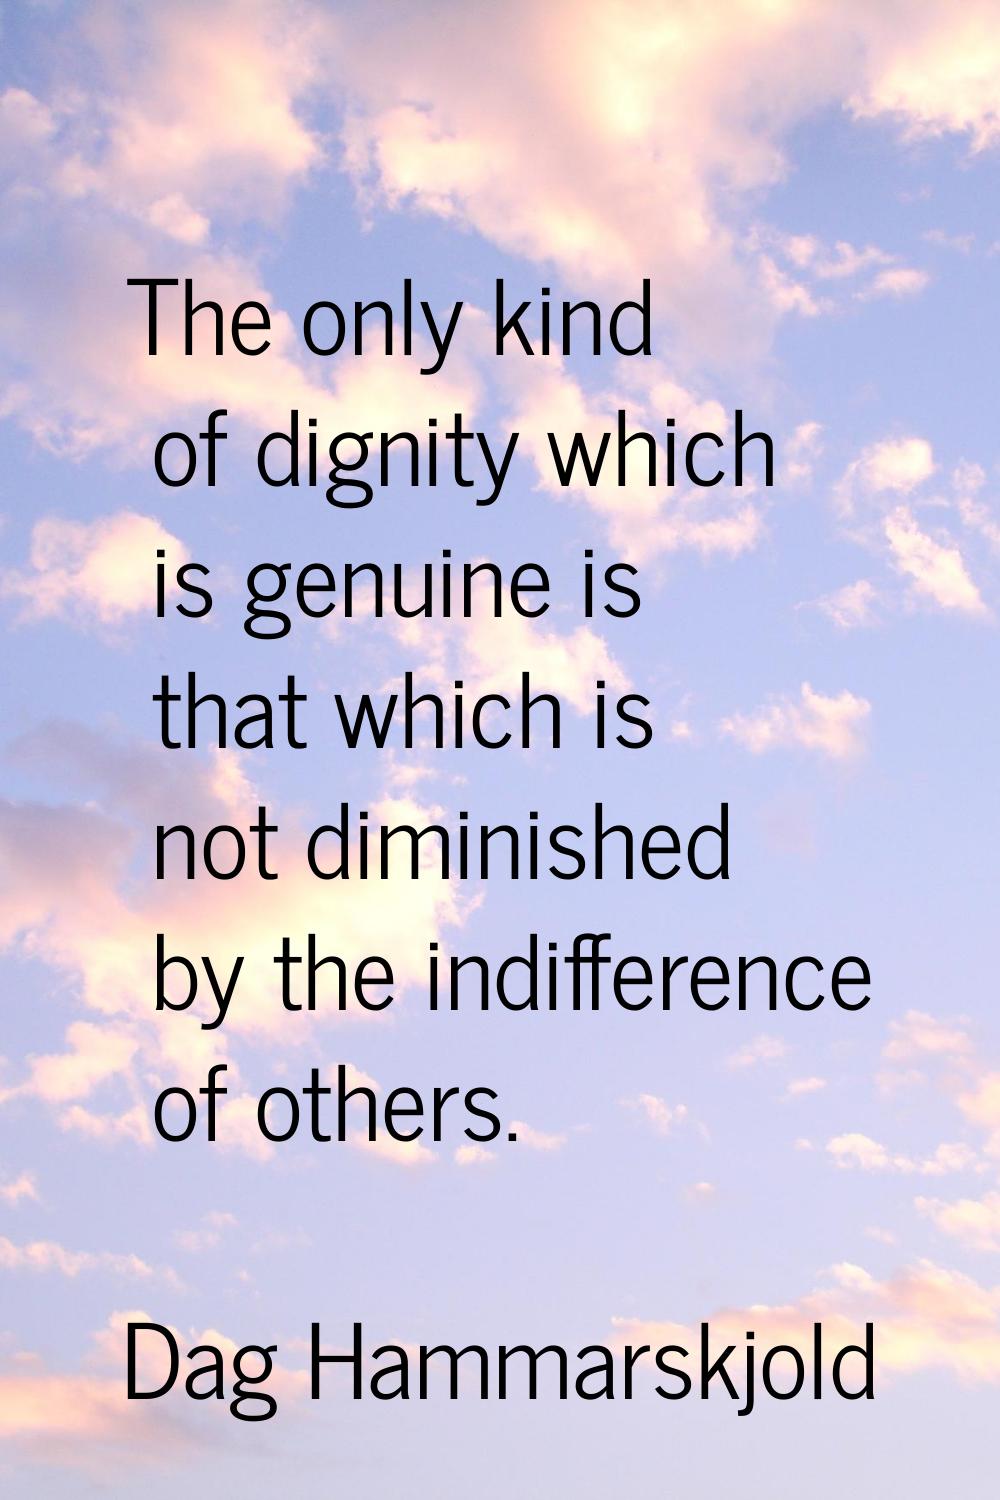 The only kind of dignity which is genuine is that which is not diminished by the indifference of ot